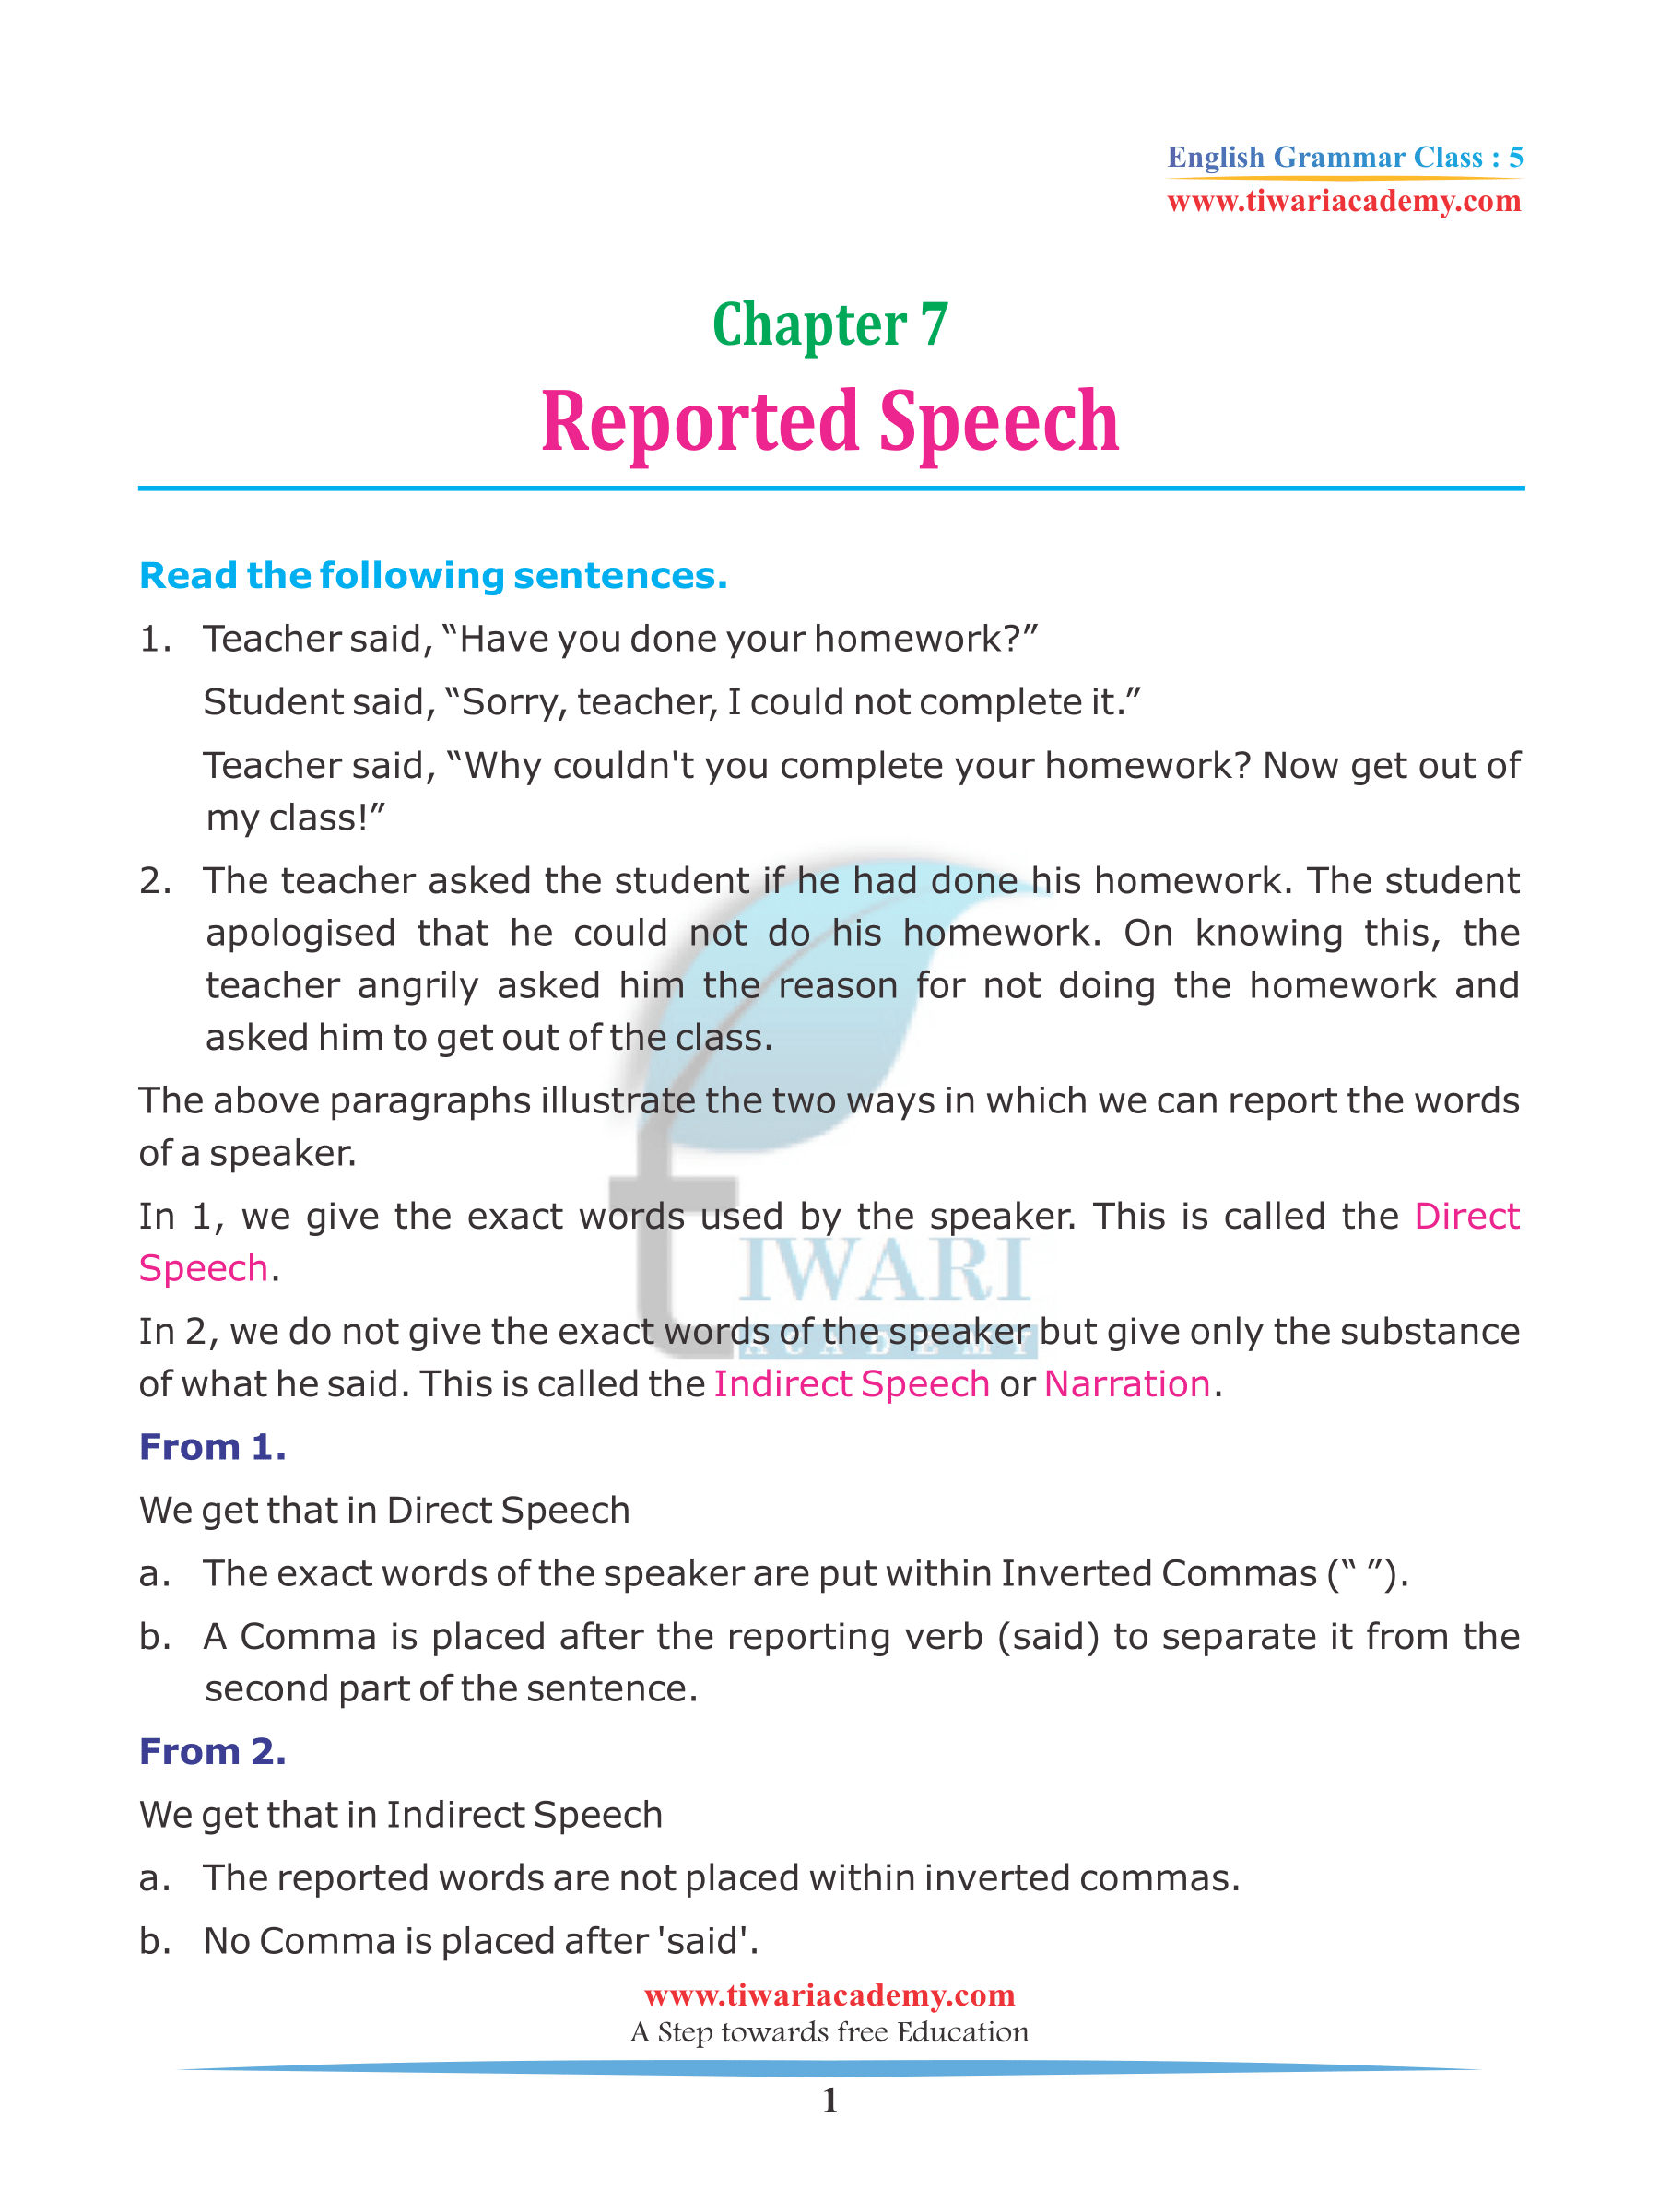 NCERT Solutions for Class 5 English Grammar Chapter 7 Reported Speech (Direct and Indirect Speech)